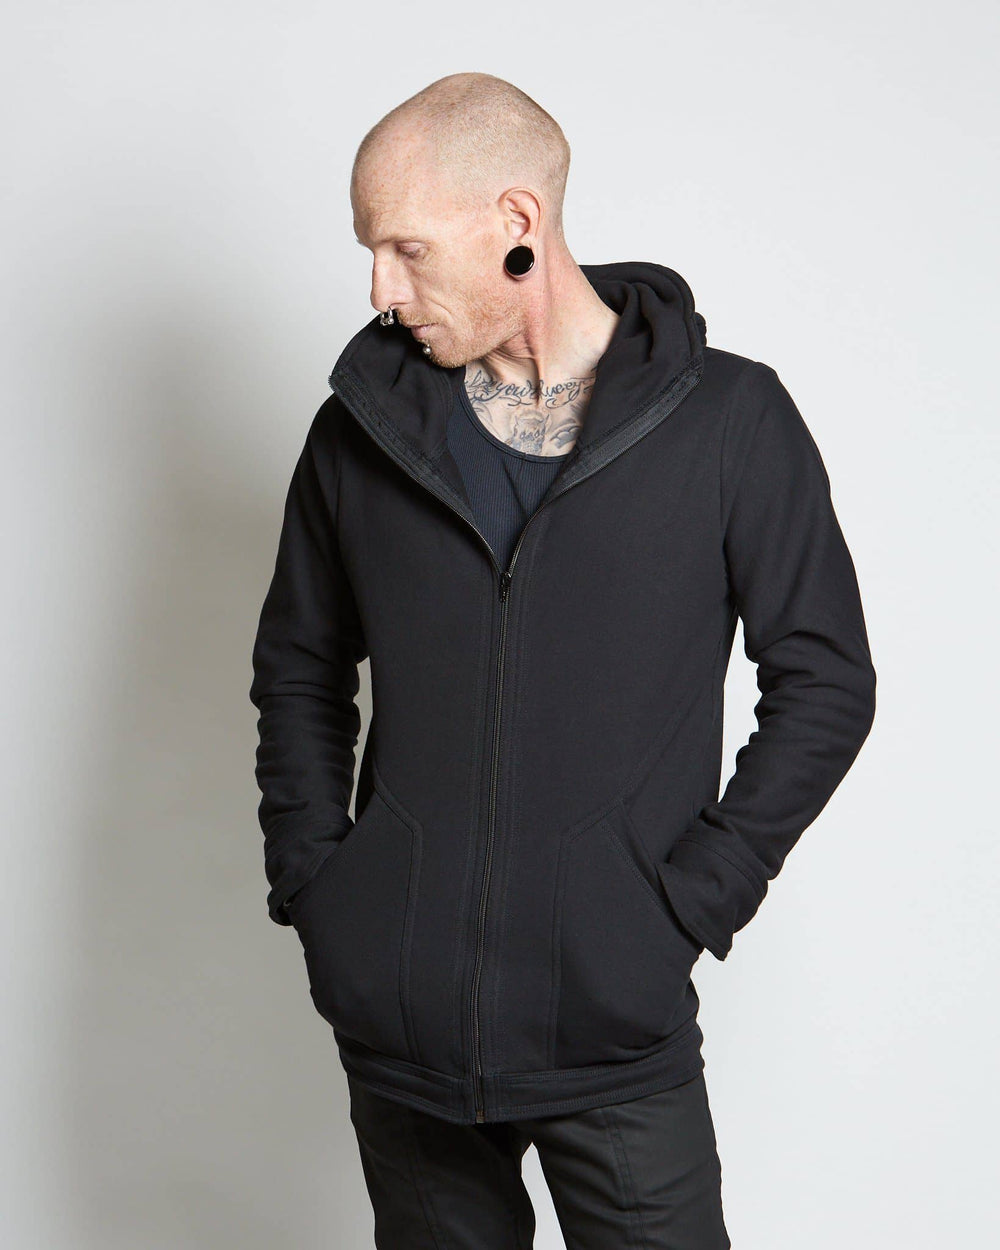 100% cotton mens hoodie handmade in the USA